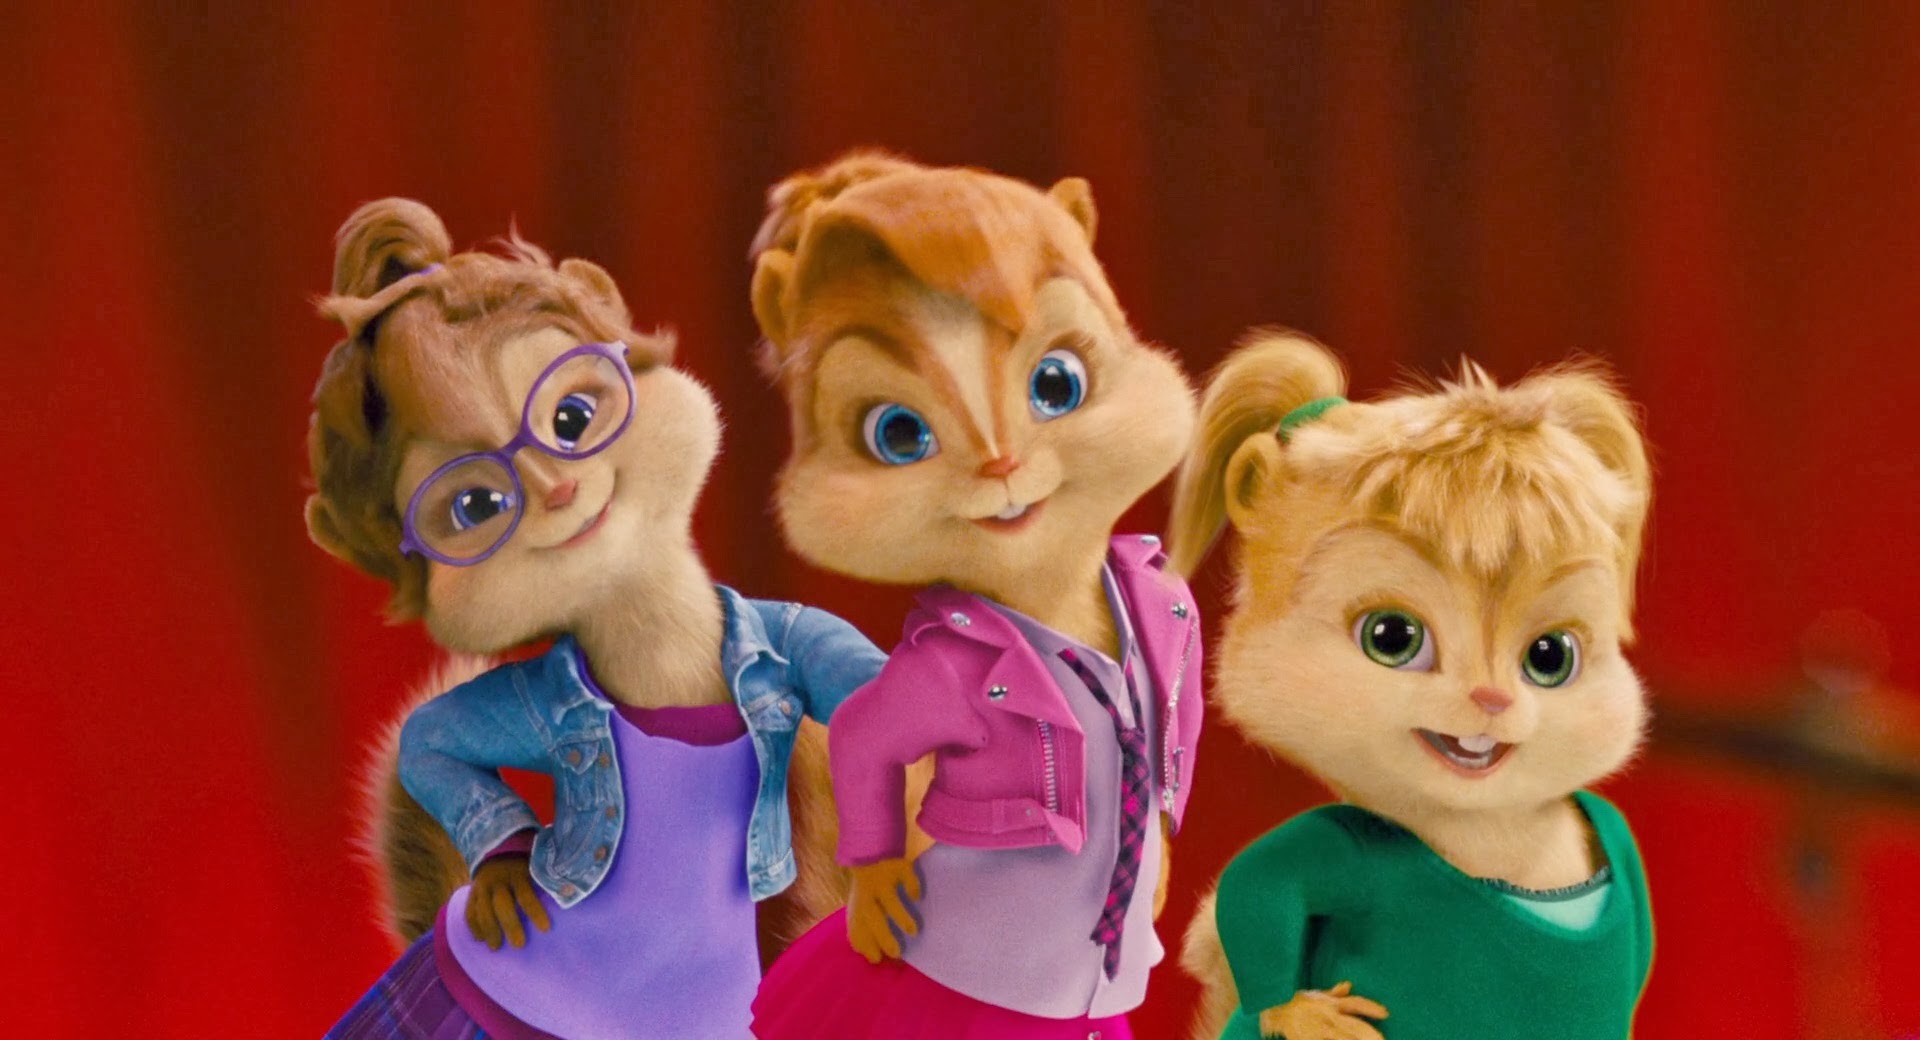 Favorite song the Chipettes sang in 2009? - The 2009 chipett